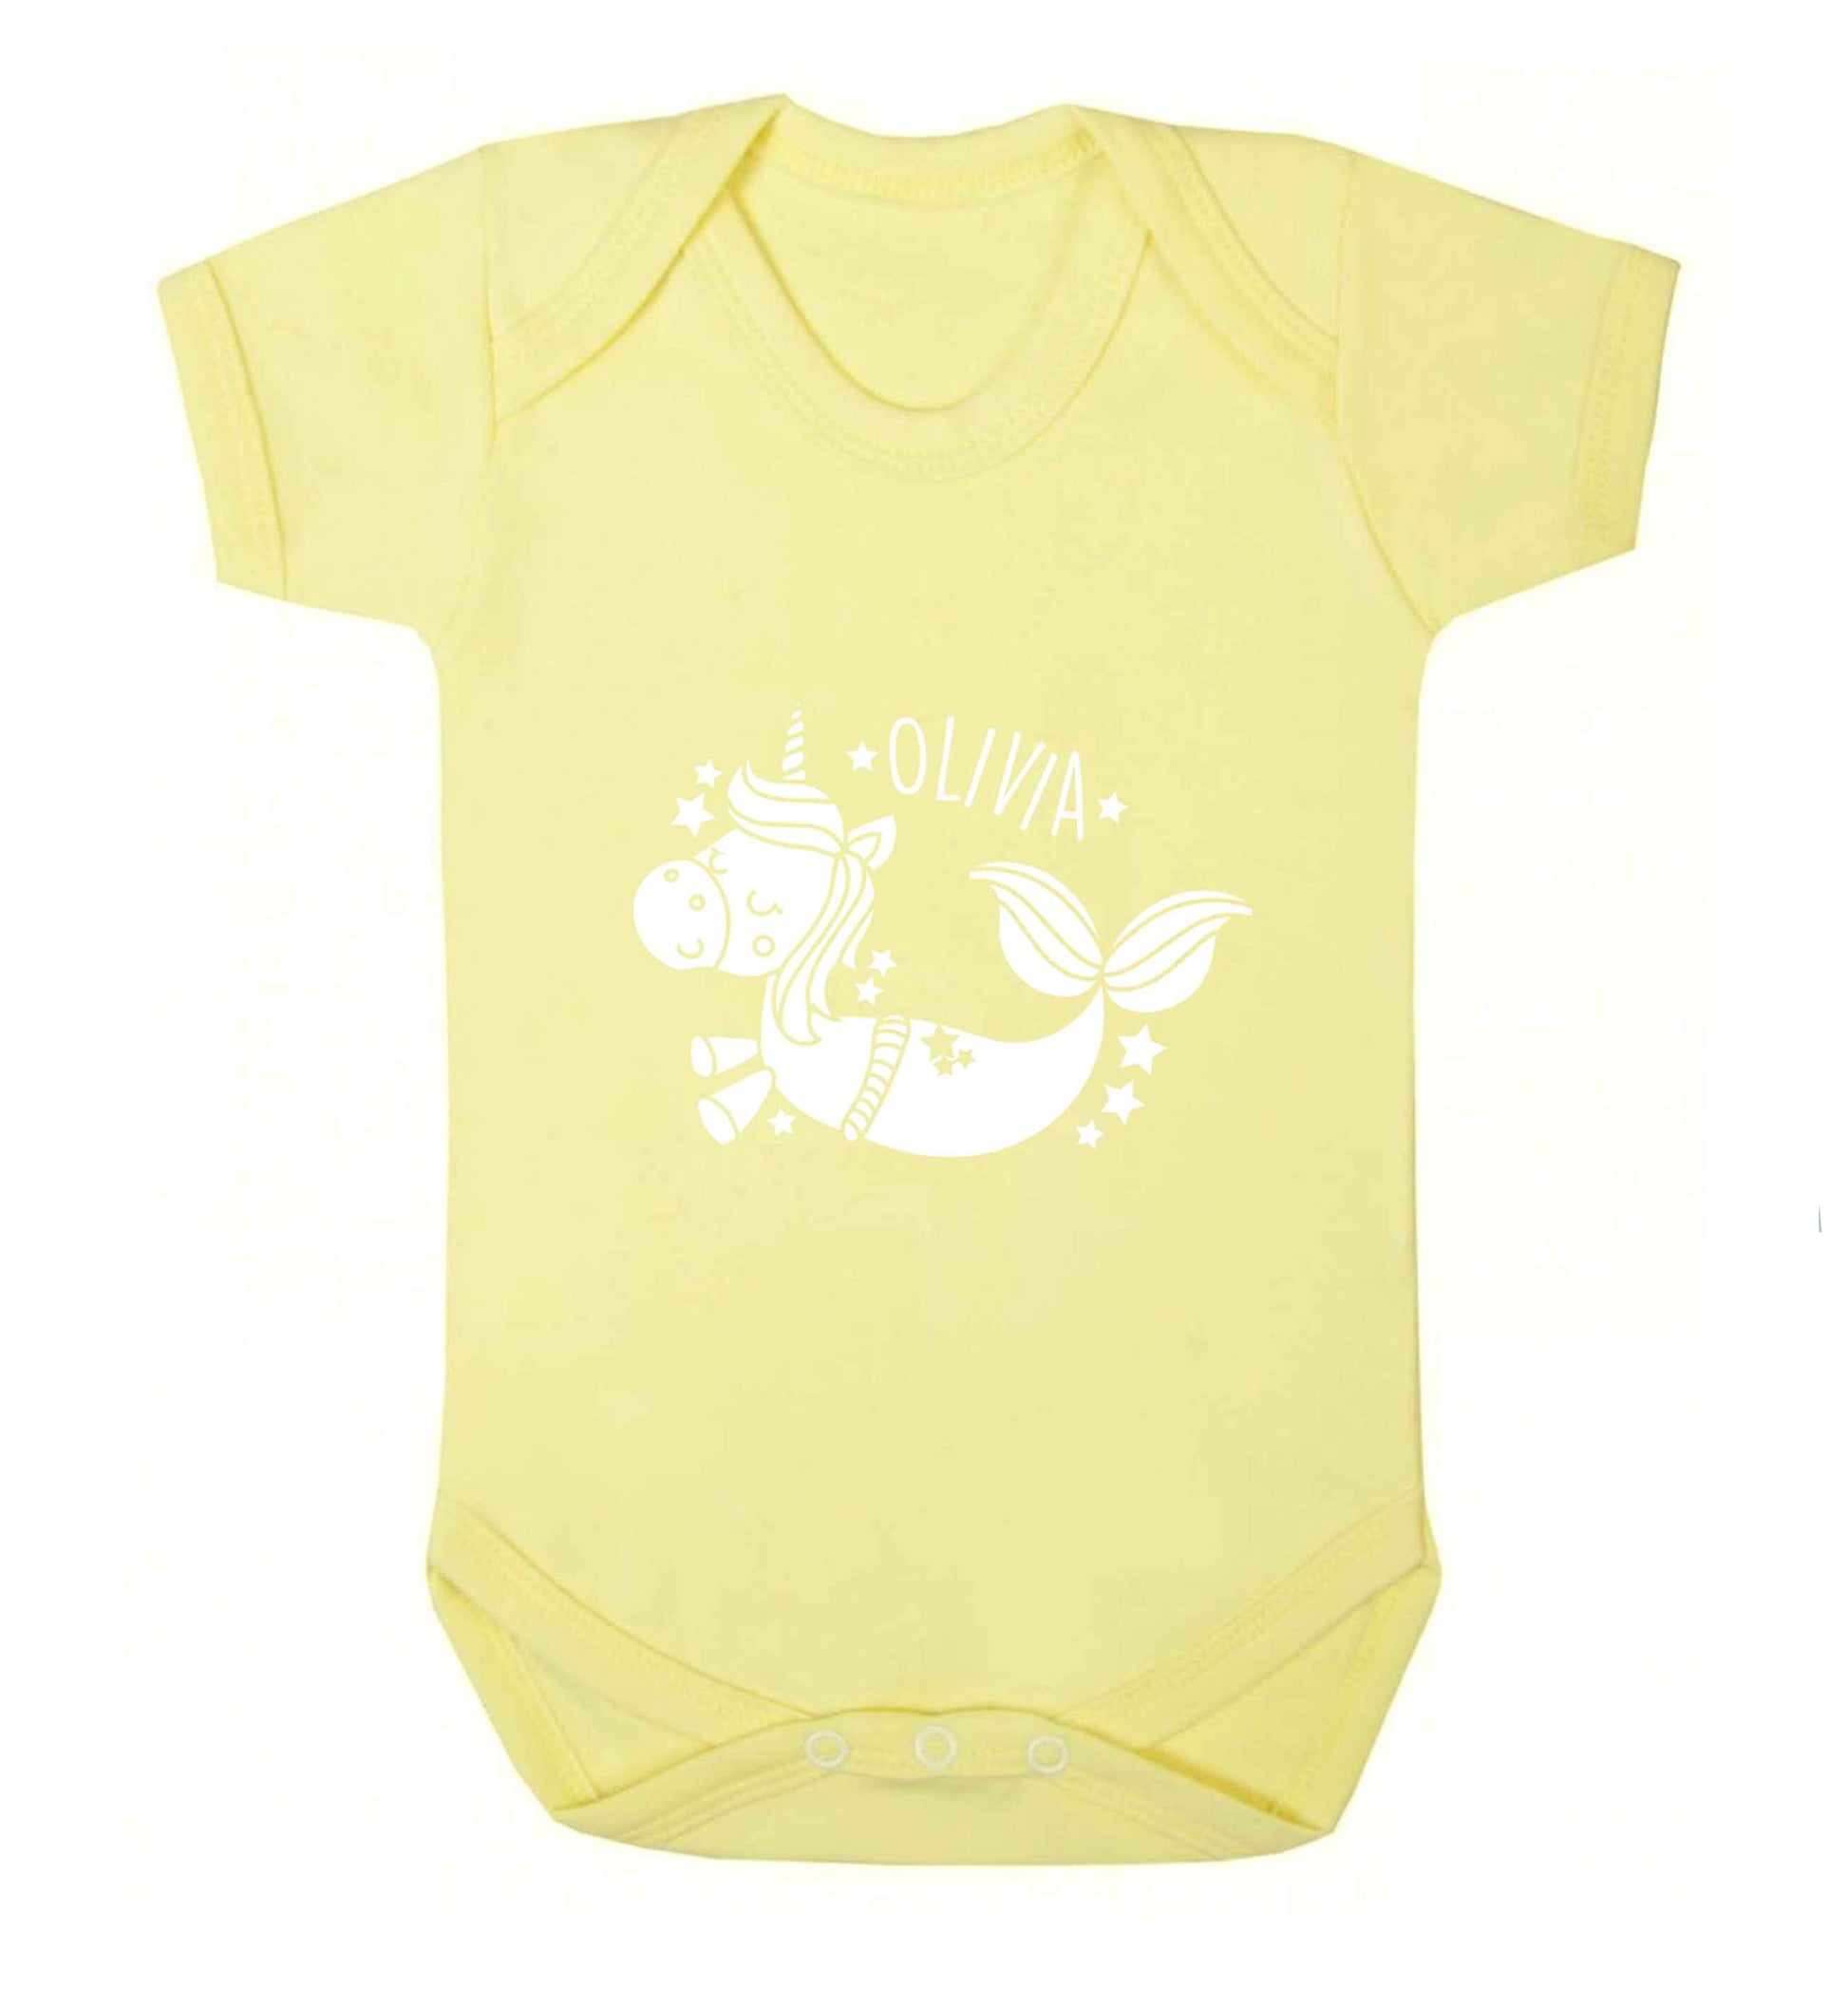 Unicorn mermaid - any name baby vest pale yellow 18-24 months